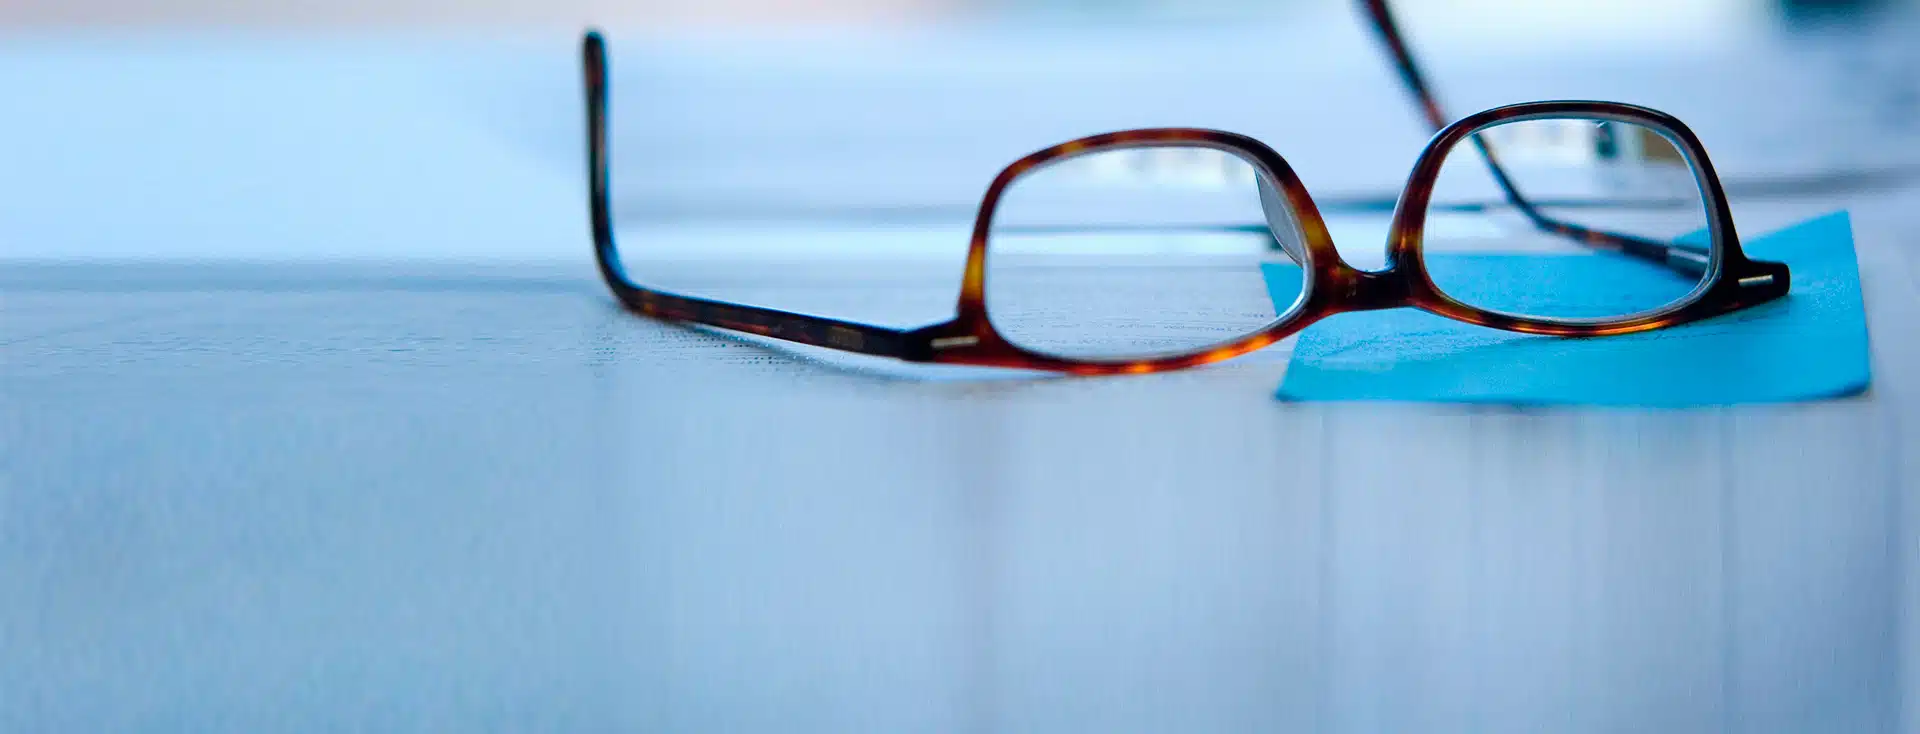 A pair of glasses lies beside a page of notes